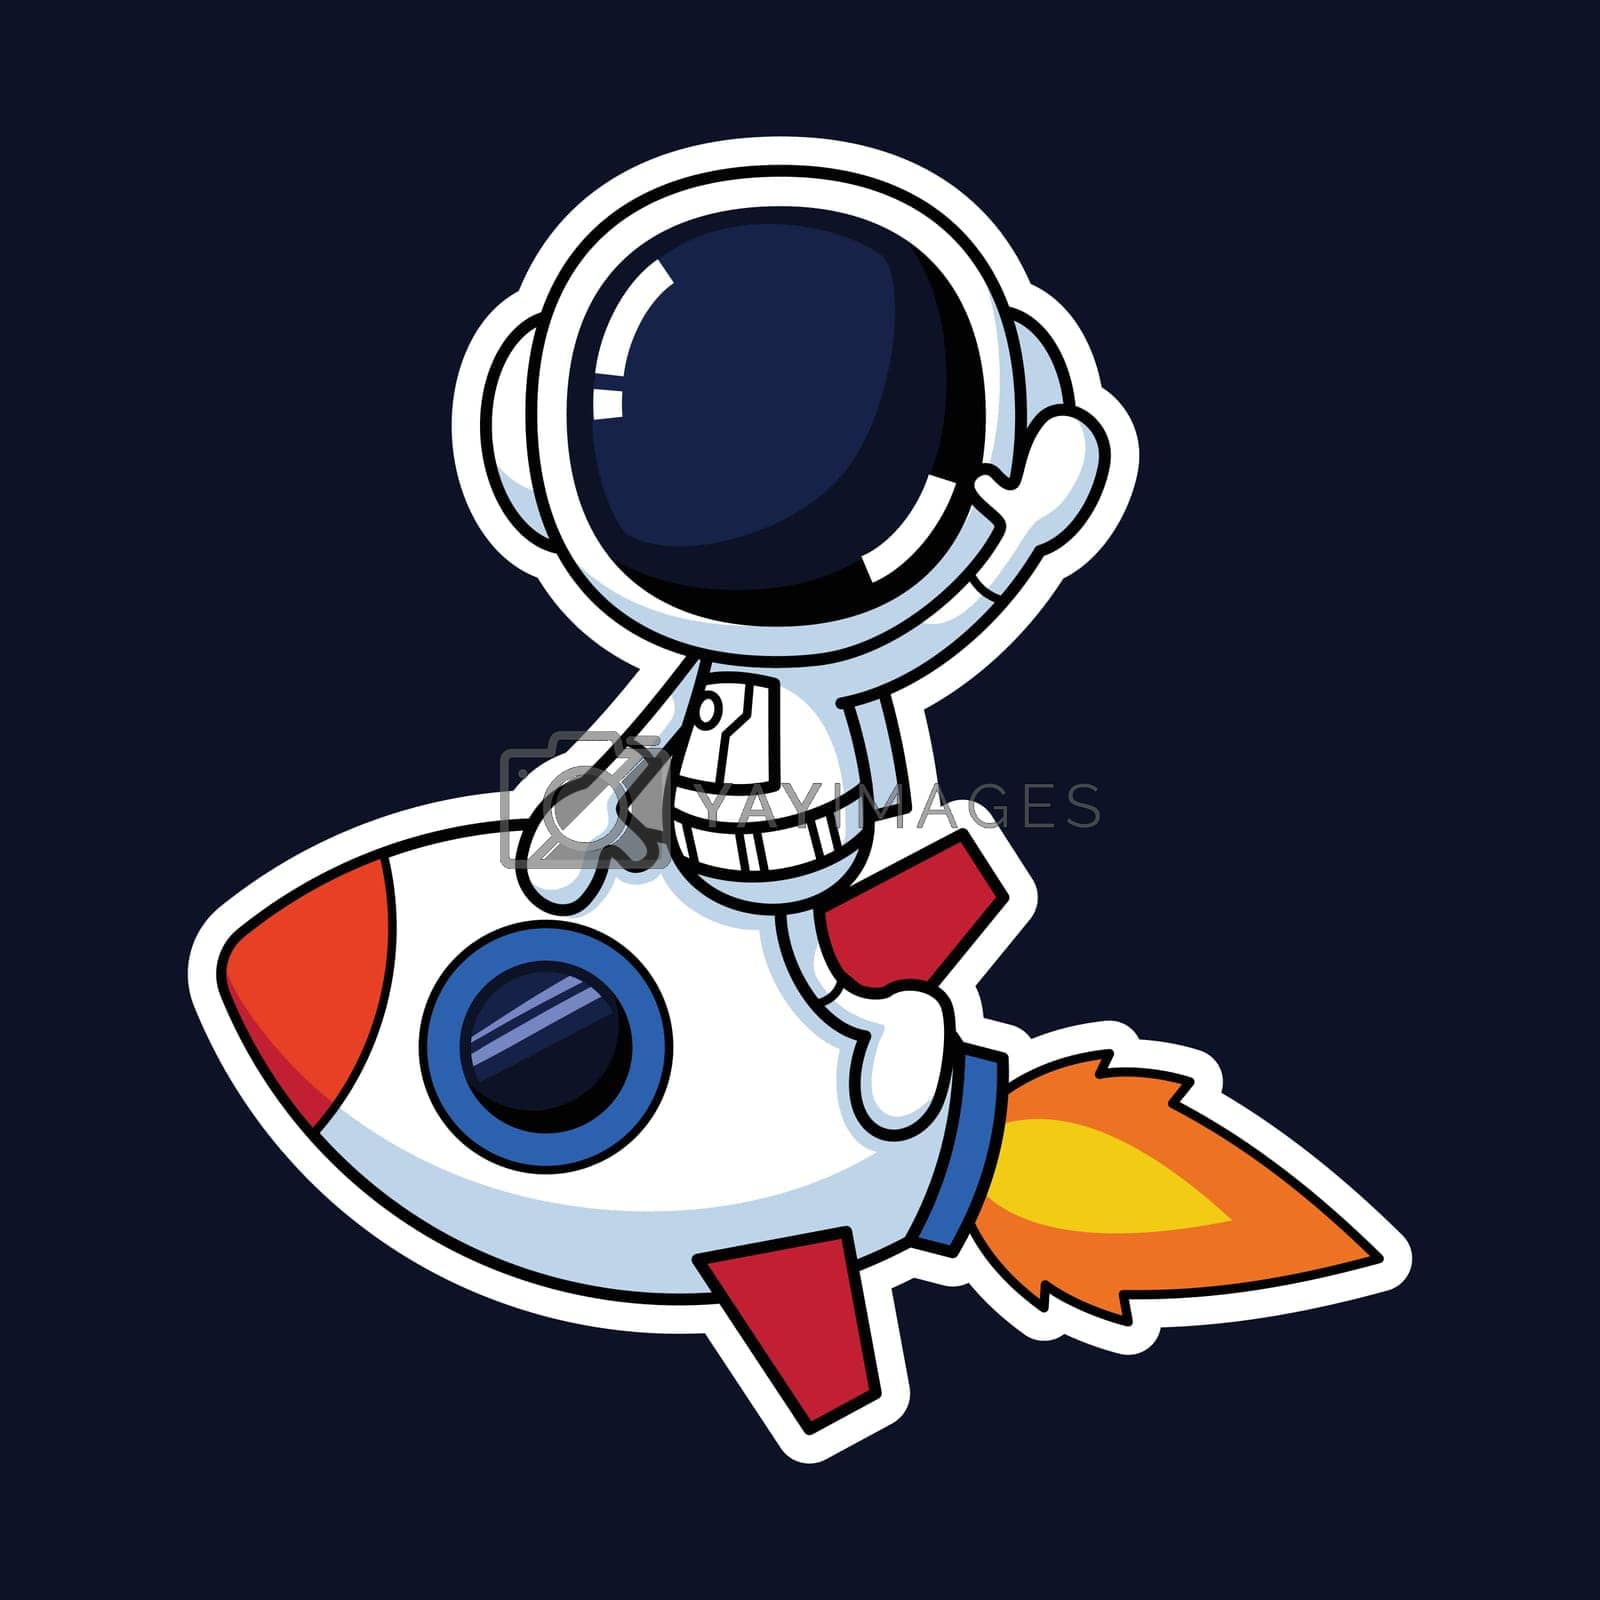 Royalty free image of Cute Astronaut Cartoon Character Riding A Rocket. Premium Vector Graphic Asset. by JuneYap